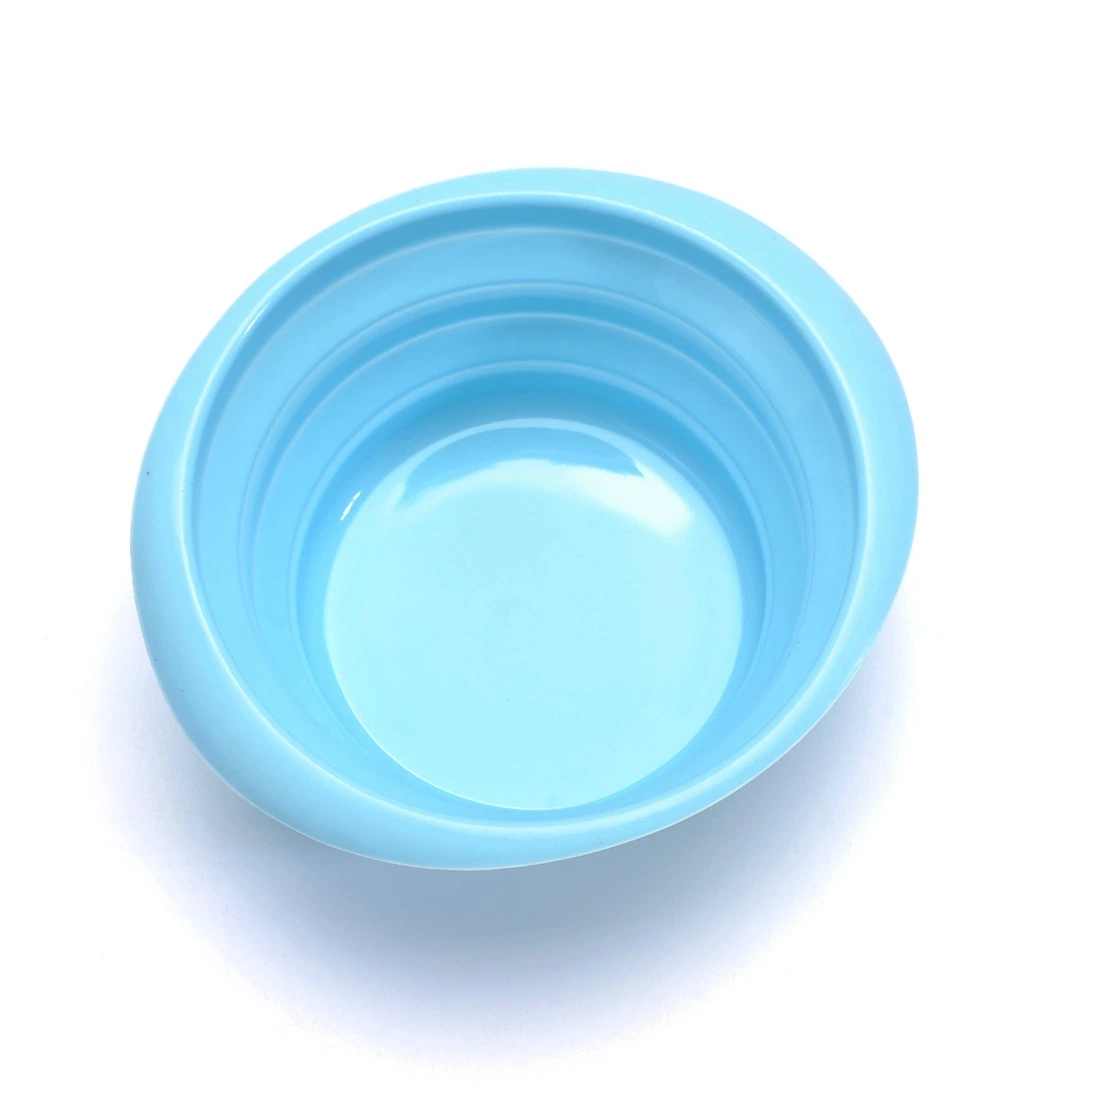 New Arrival Hot Sale Bowl Wholesale/Supplier Travel Collapsible Bowl Round Silicone Foldable Bowl